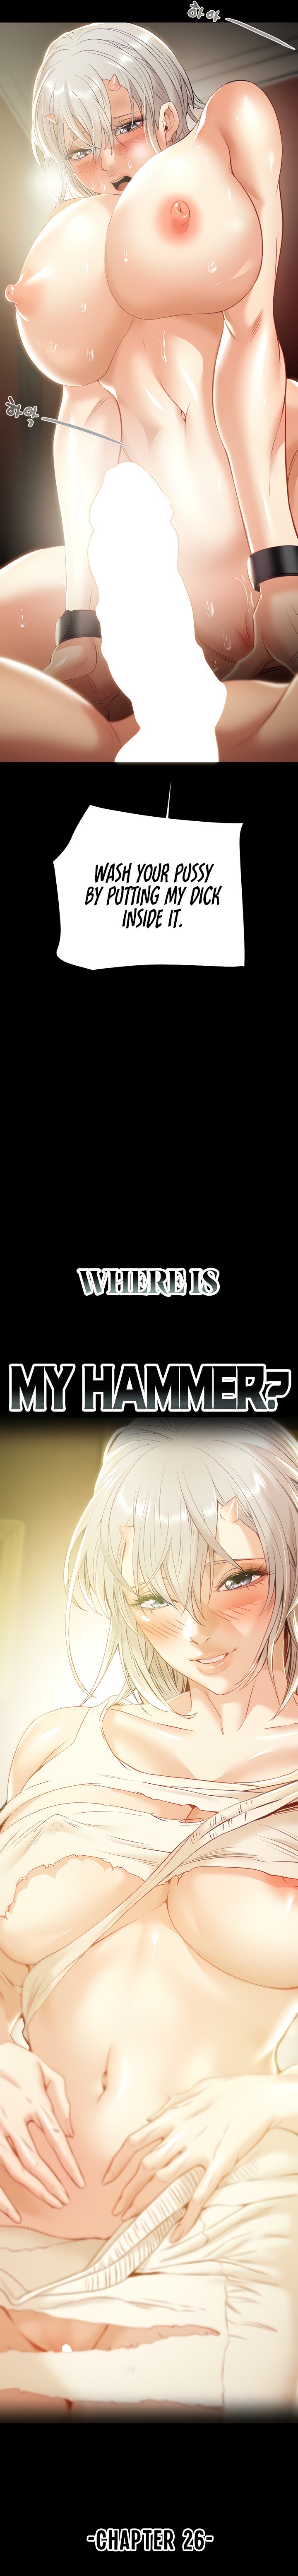 where-is-my-hammer-chap-26-1